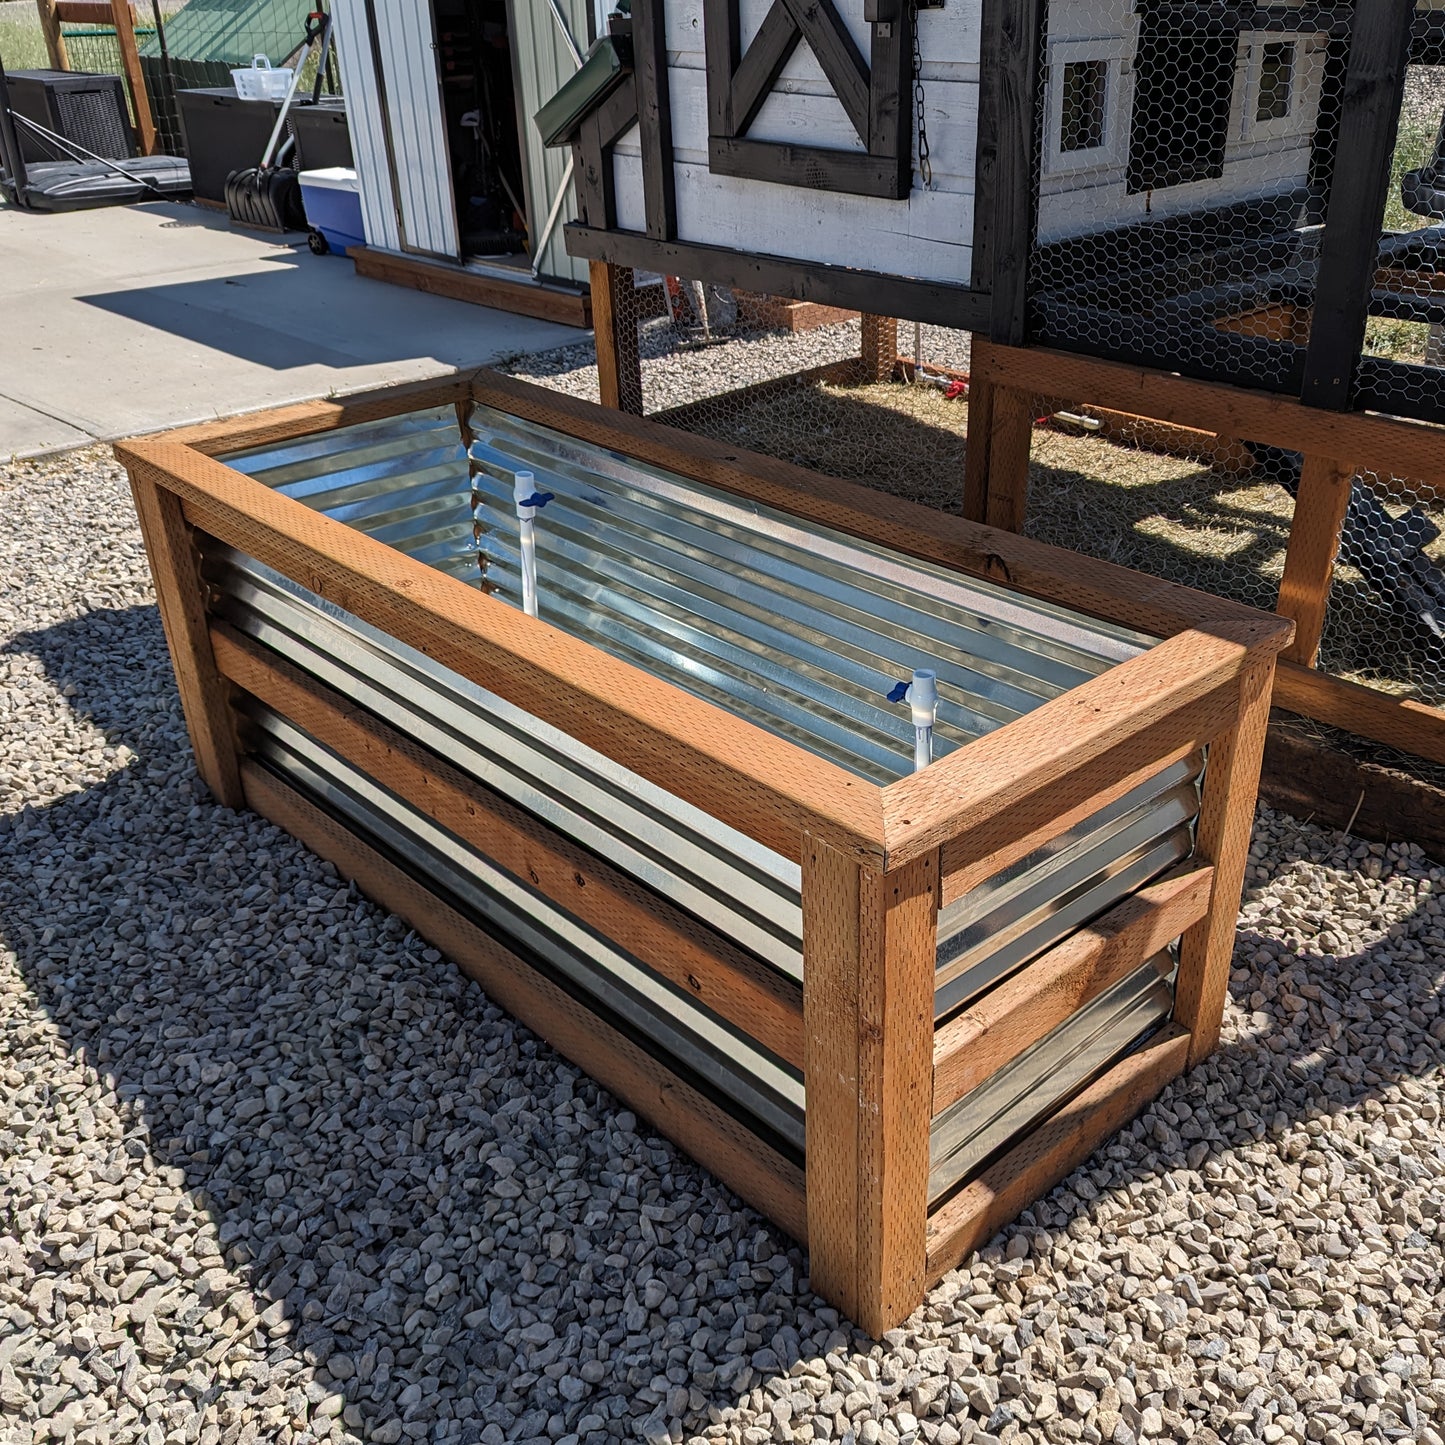 Shed & Dipity "Homeshed" Planter Boxes